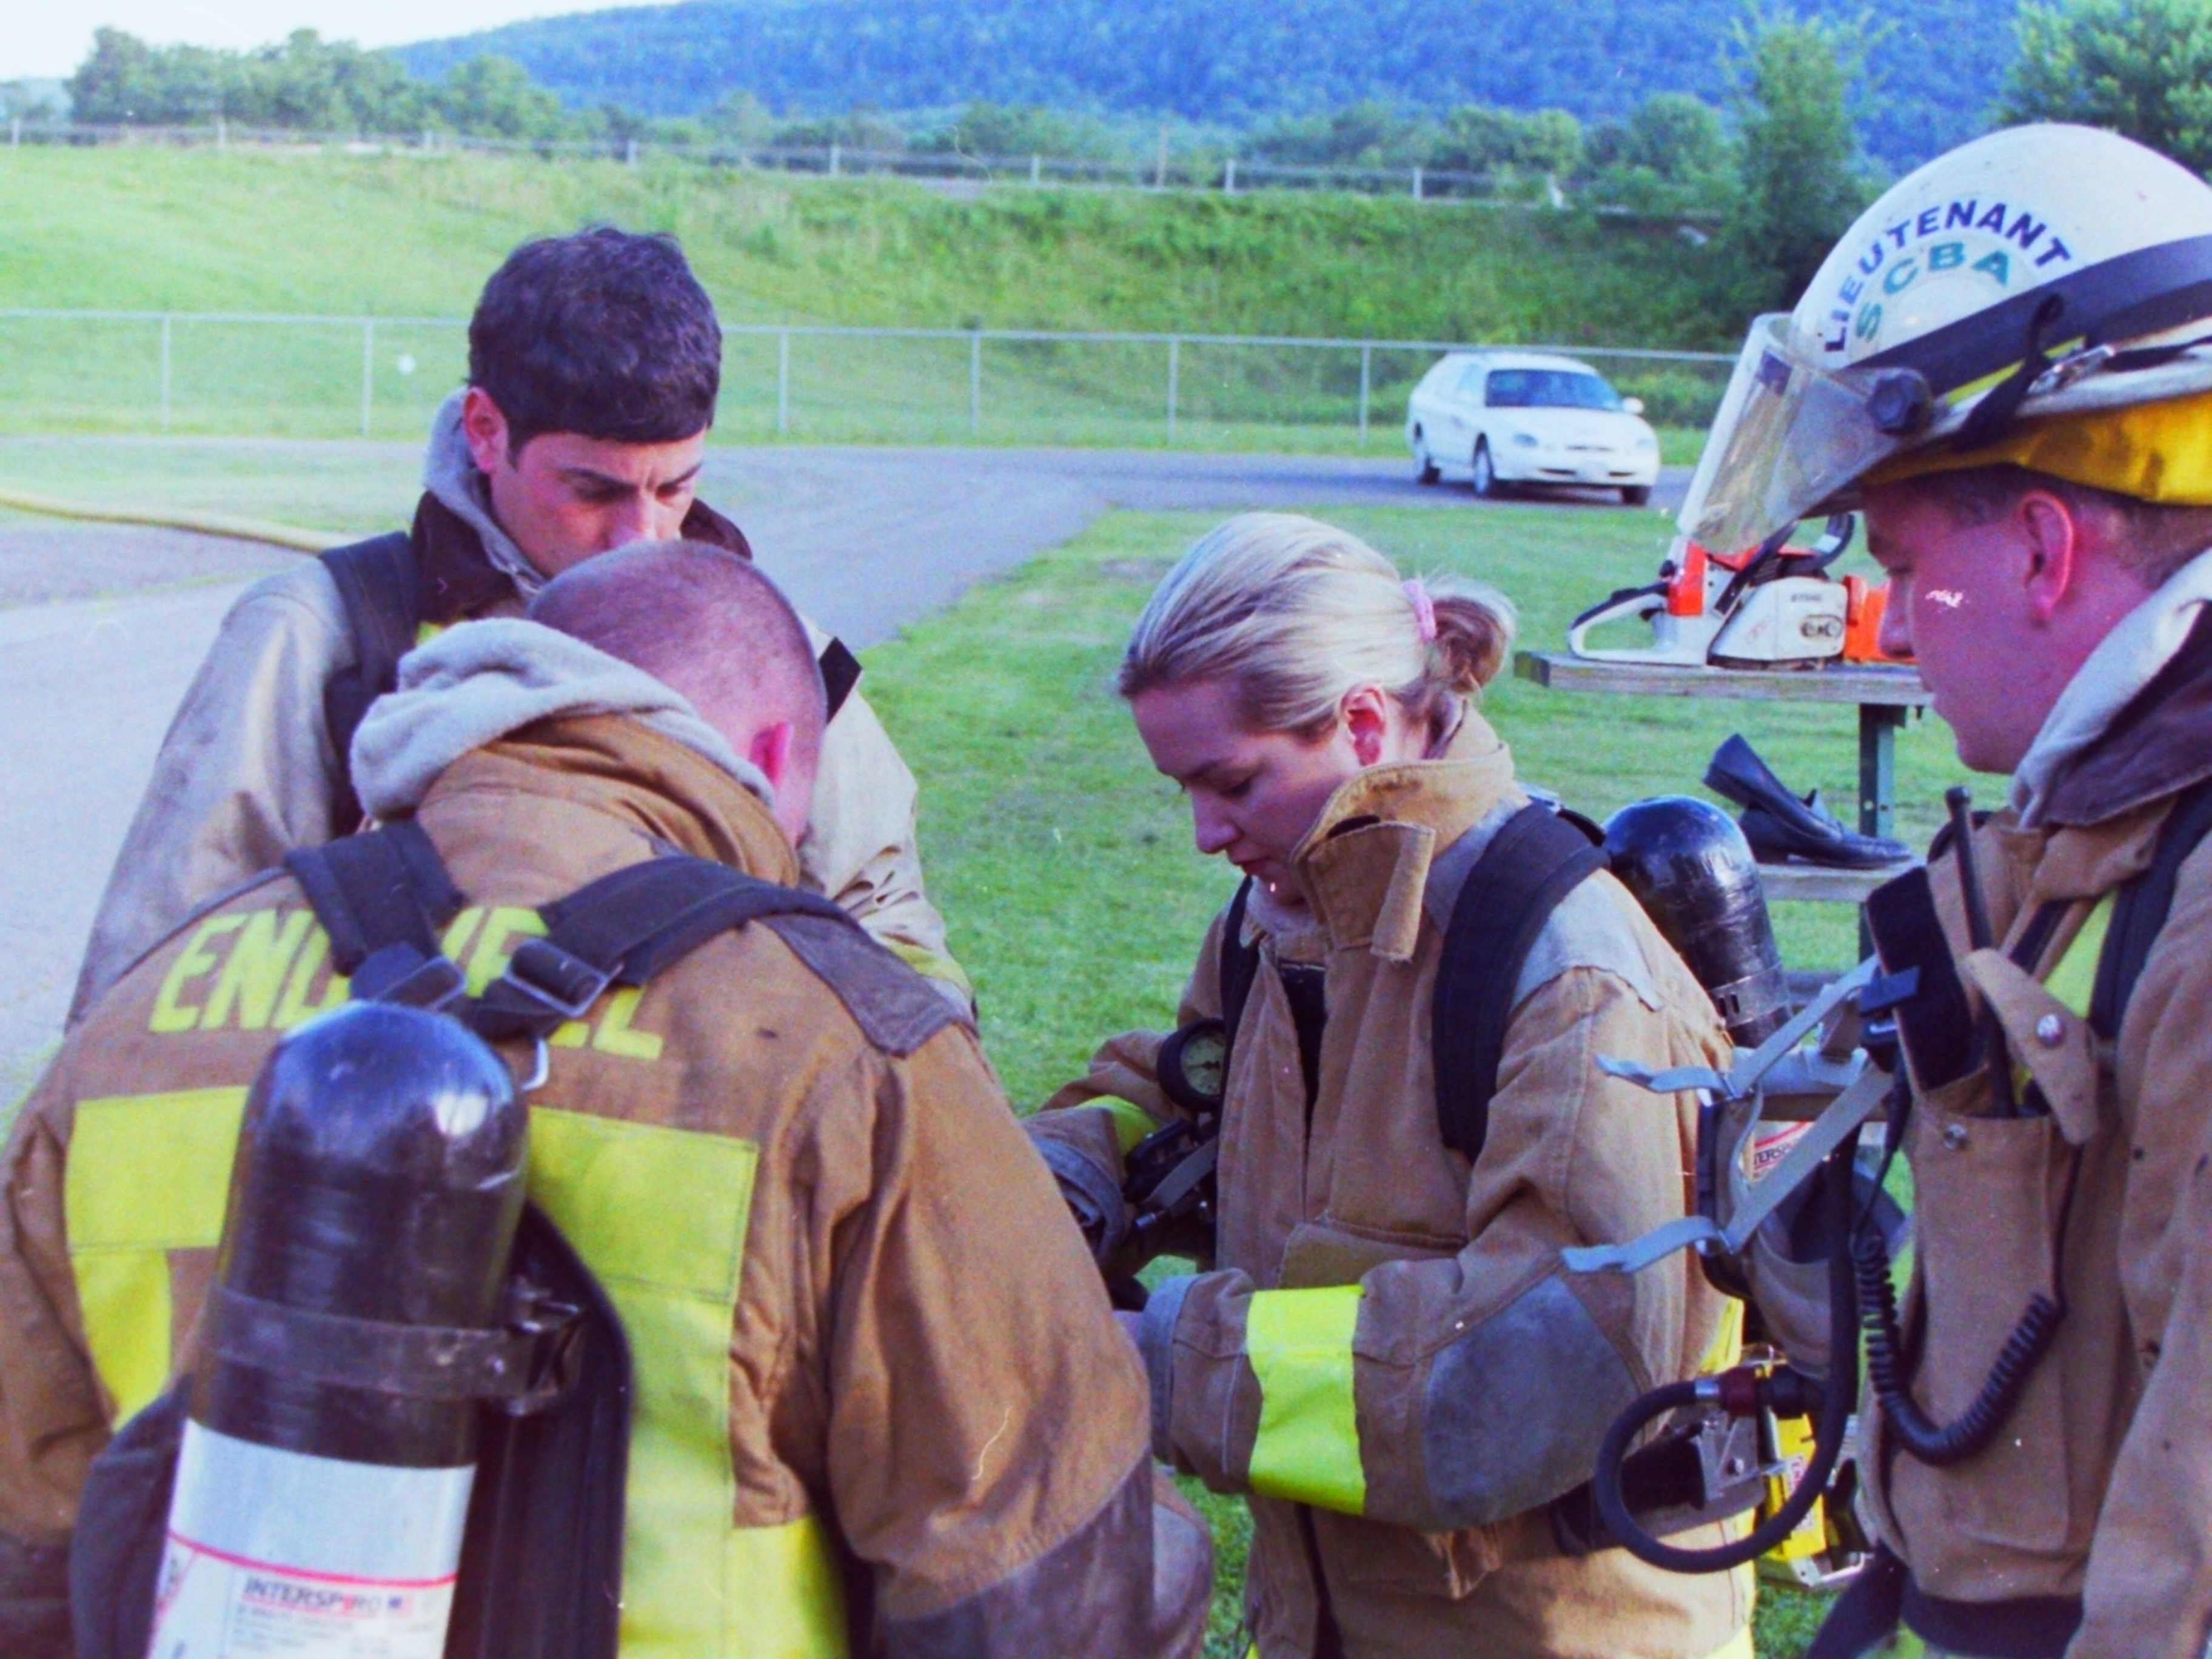 07-08-98  Training - Special Training With Thermal Imaging Camera